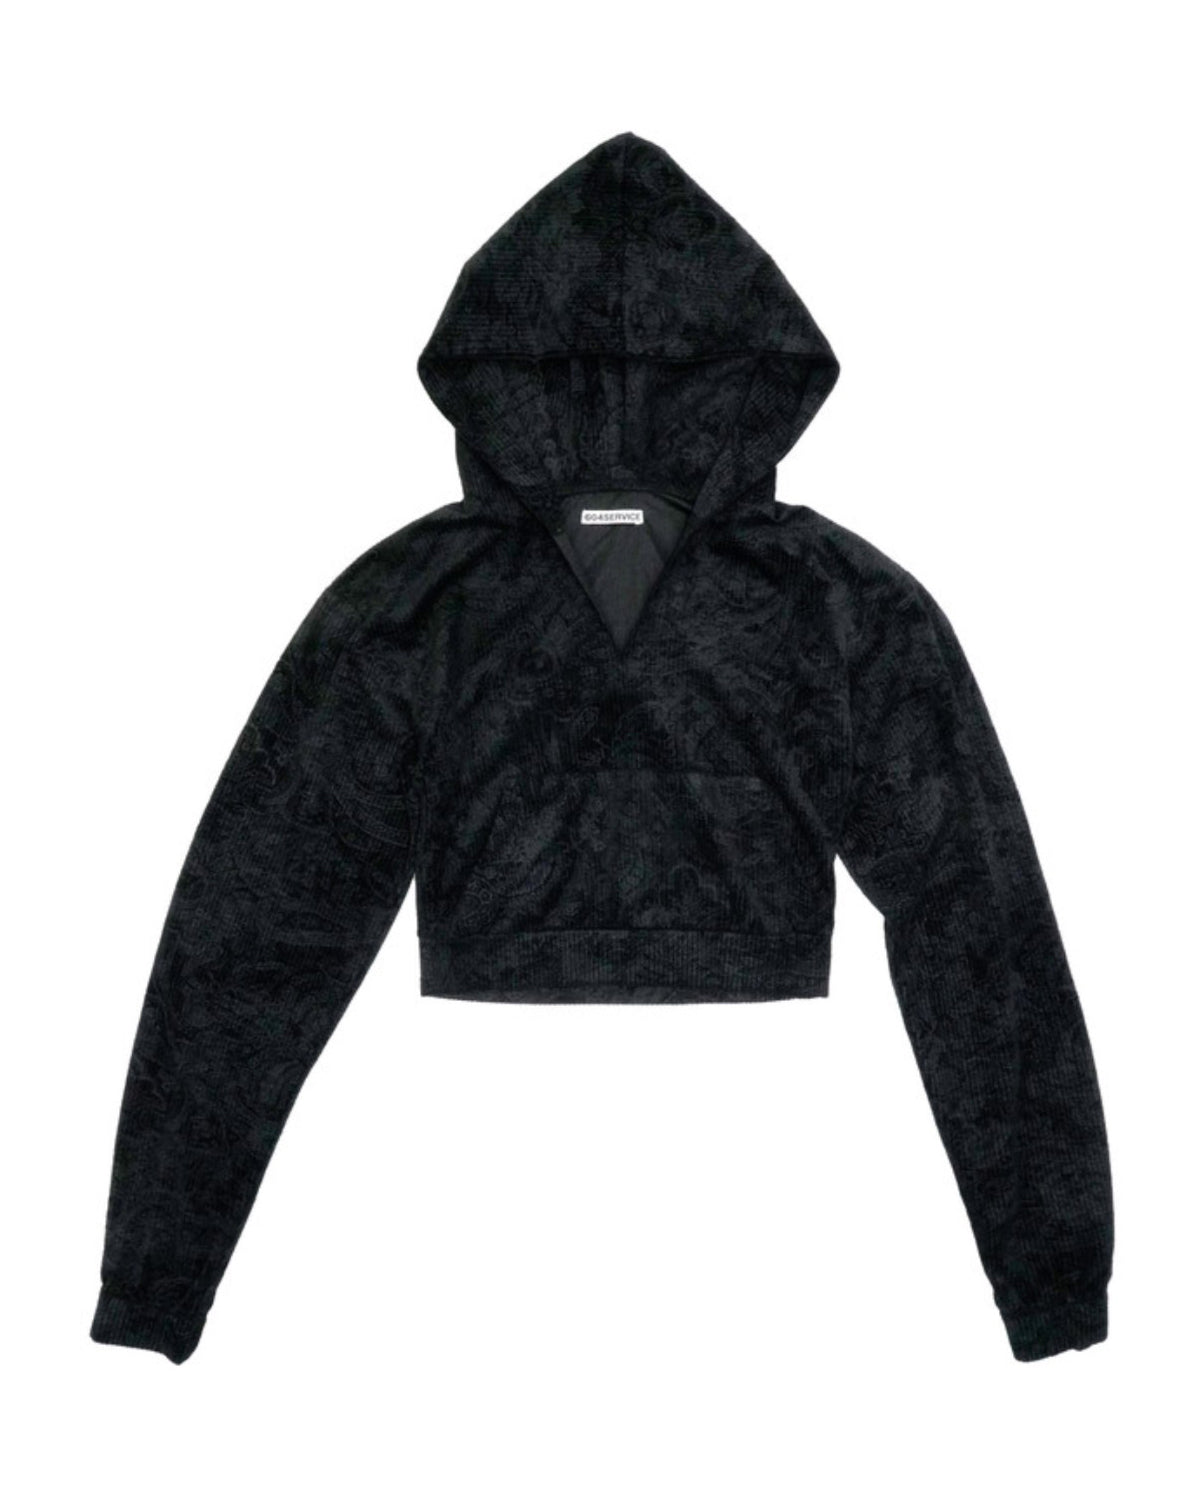 604 SERVICE - PAISLEY LOUNGE  HOODIE - Error404store. Cropped black hoodie sustainably made by emerging designer, available in Melbourne clothing boutique.